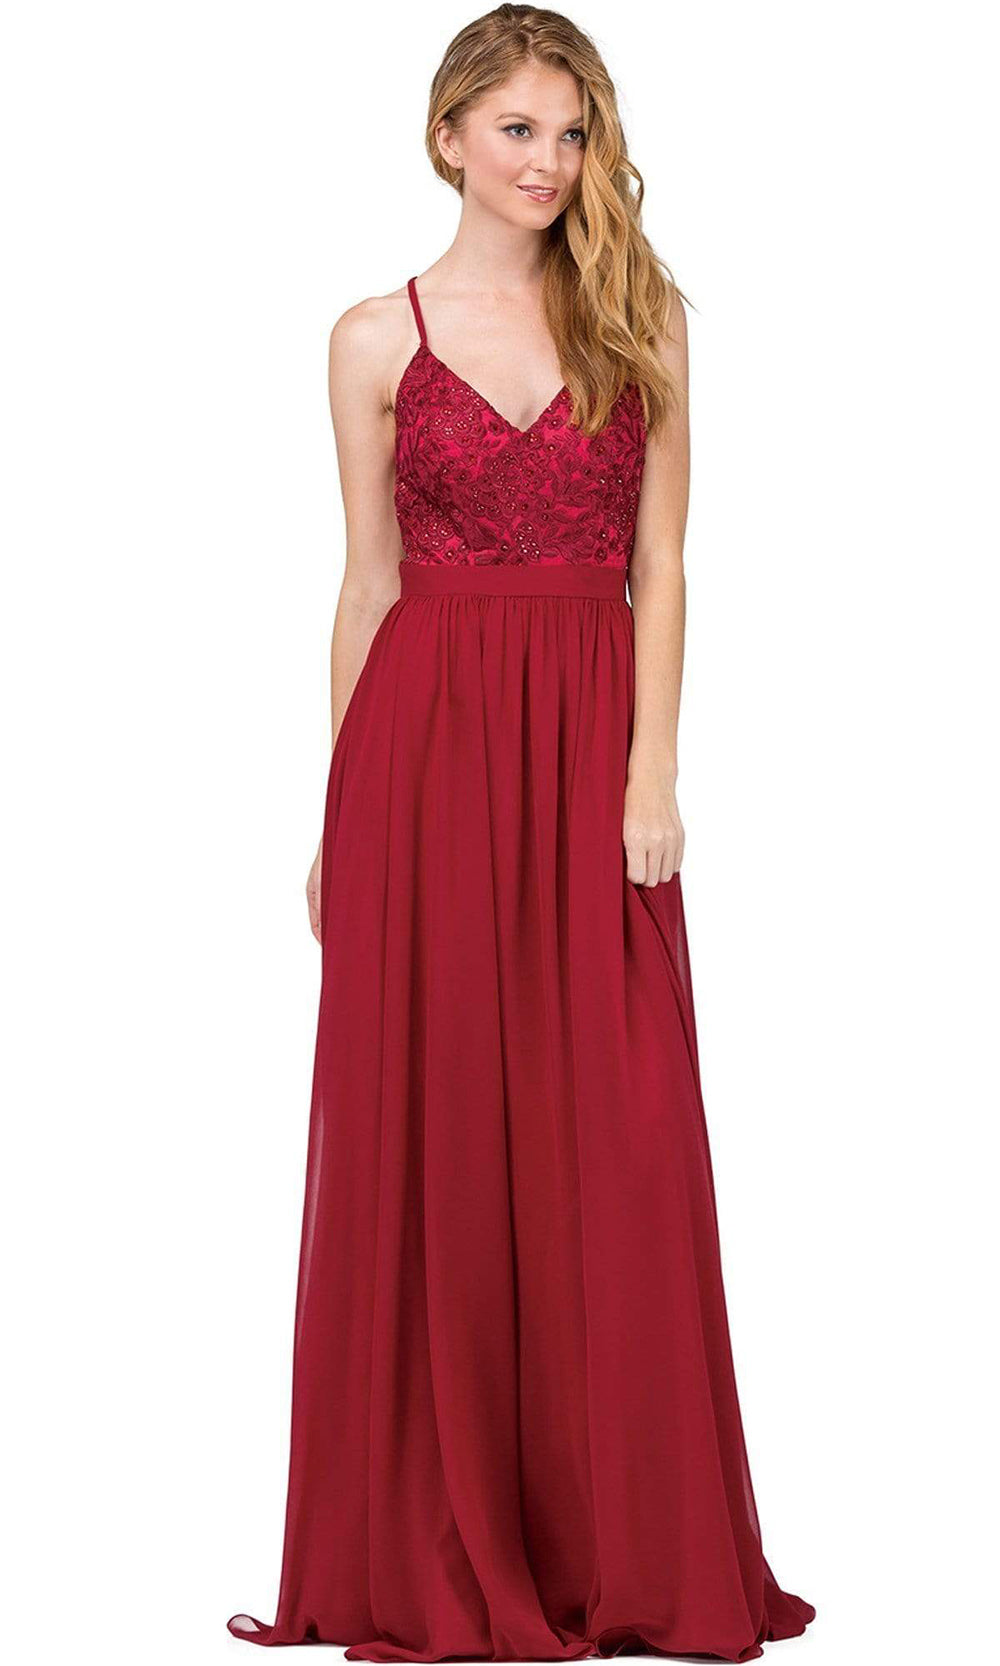 Dancing Queen - Beaded Lace V-neck A-line Prom Dress 9850 - 1 pc Navy In Size XS Available CCSALE XS / Red